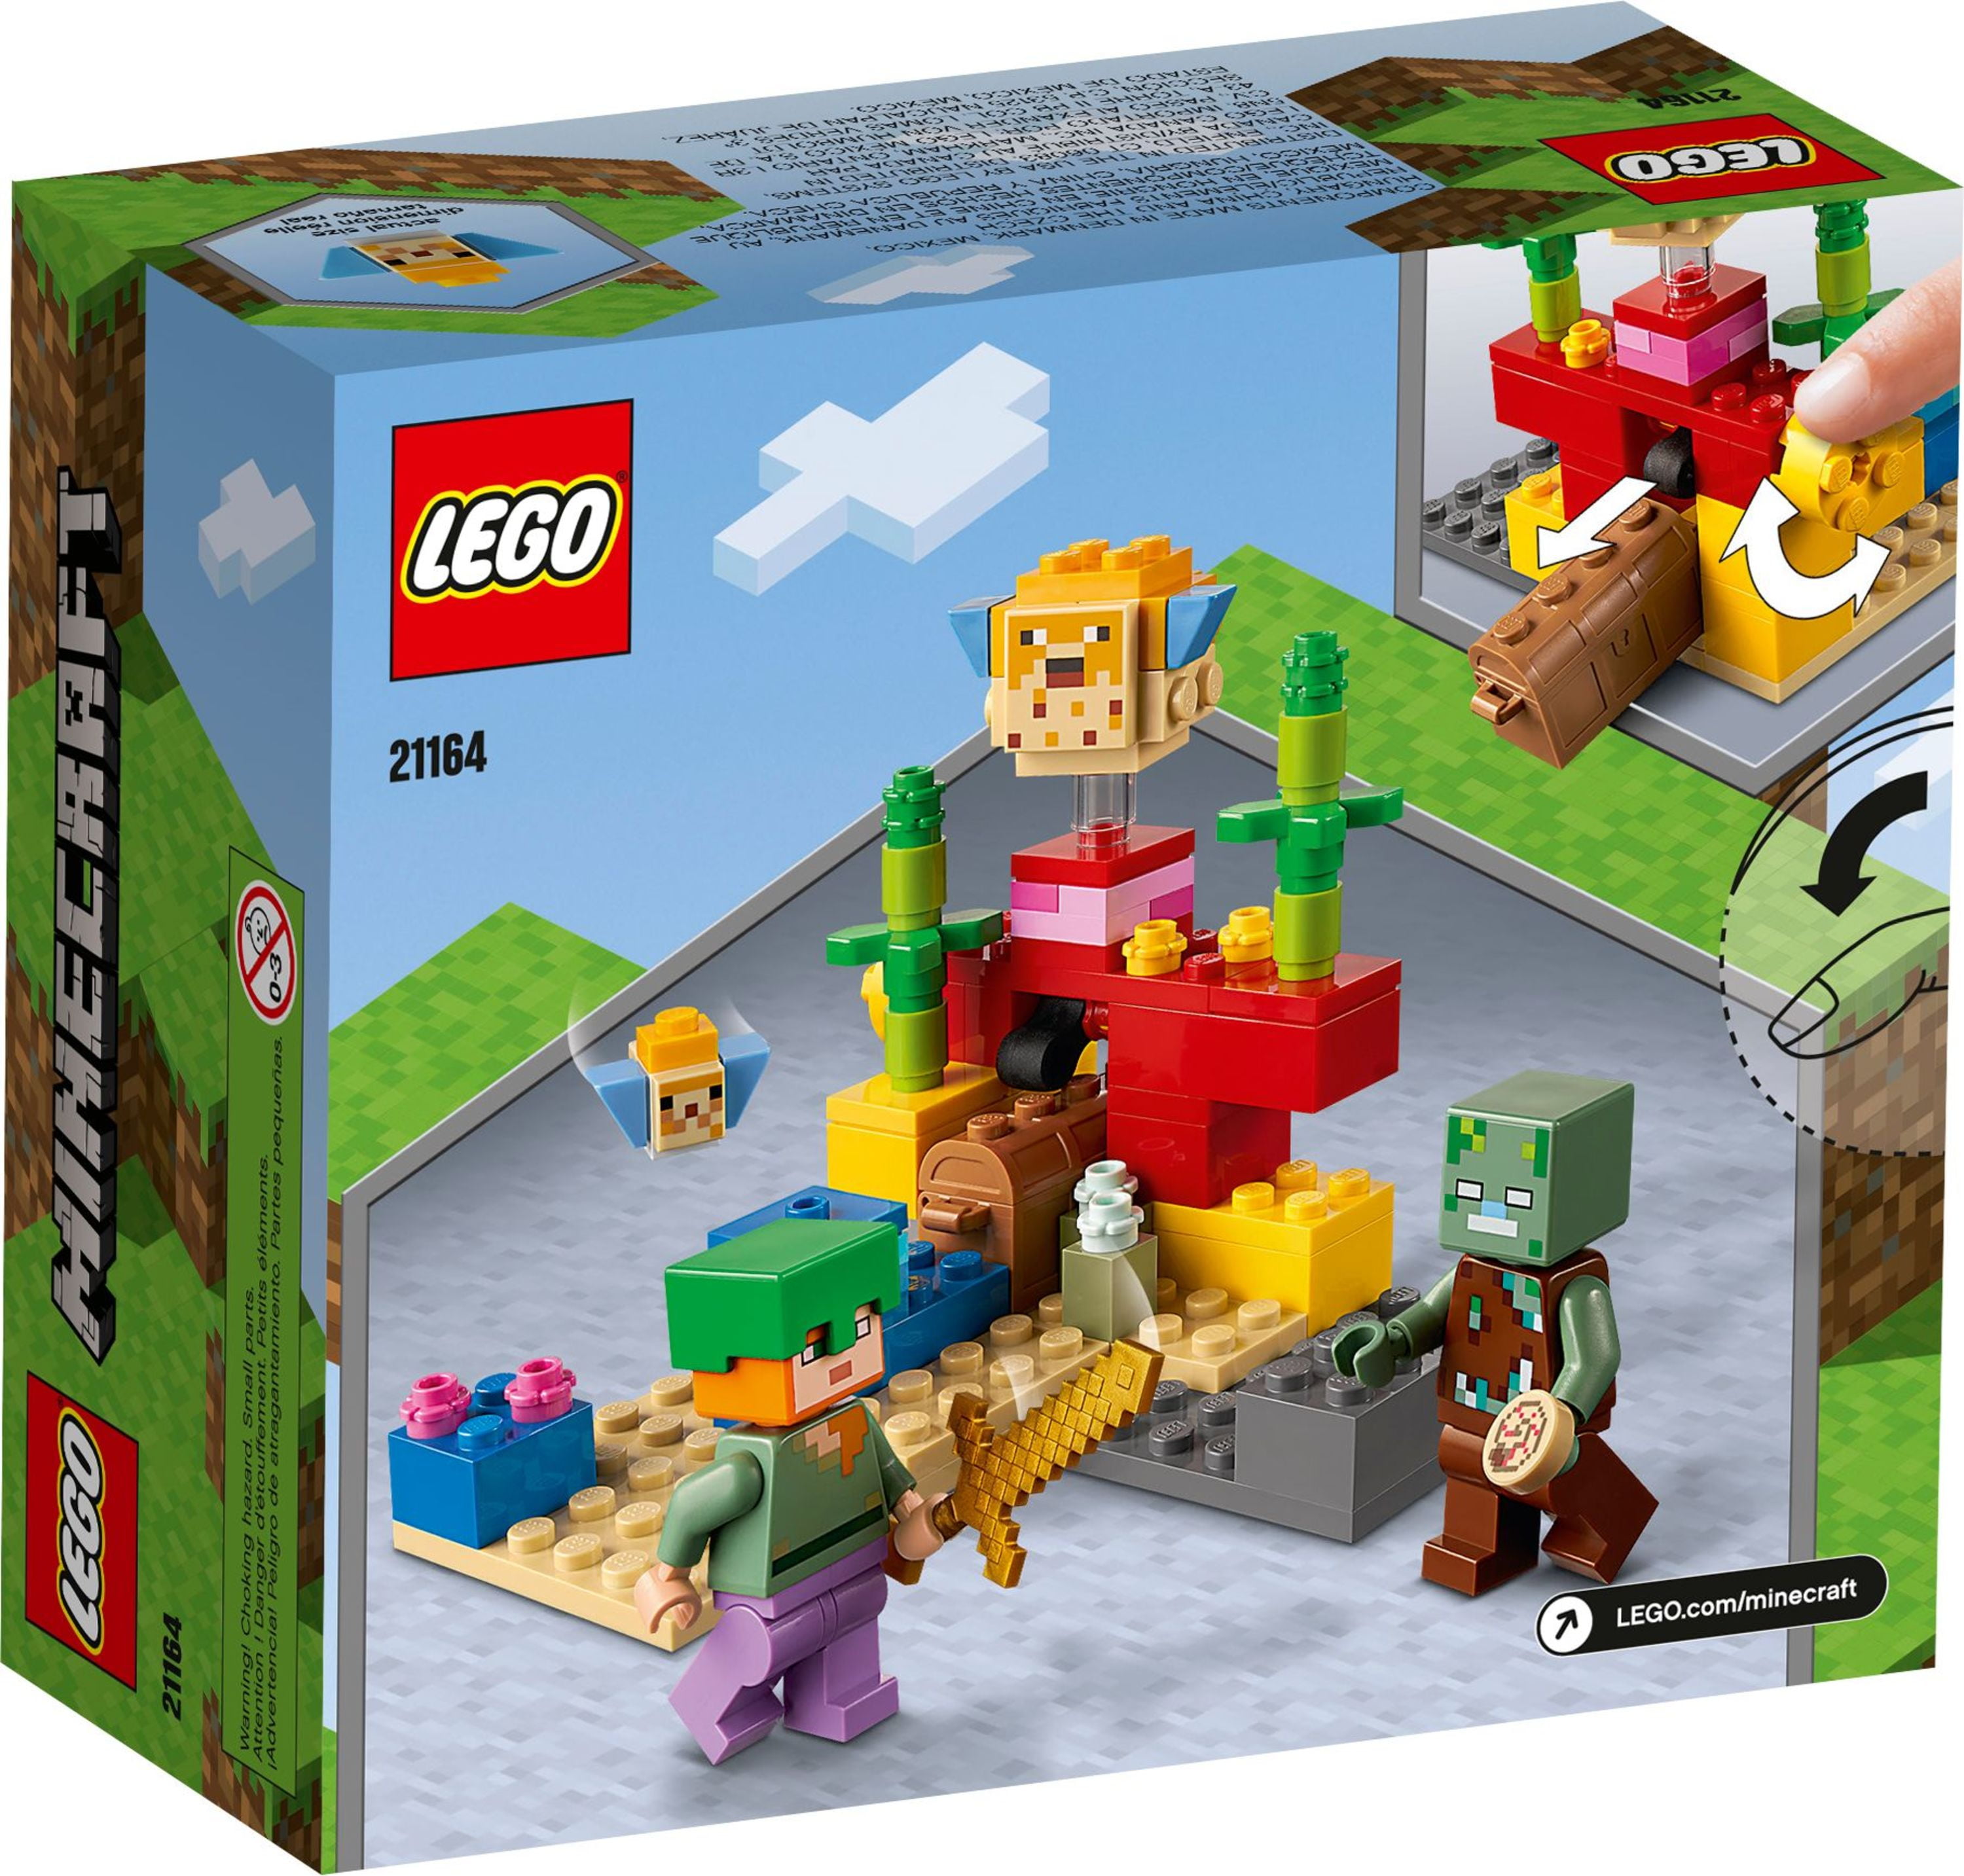 LEGO Minecraft The Coral Reef 21164 Building Toy with Alex, 2 Brick-Built Puffer Fish Animal Figures and Drowned Zombie Figure, Gifts for Kids, Boys & Girls Walmart.com